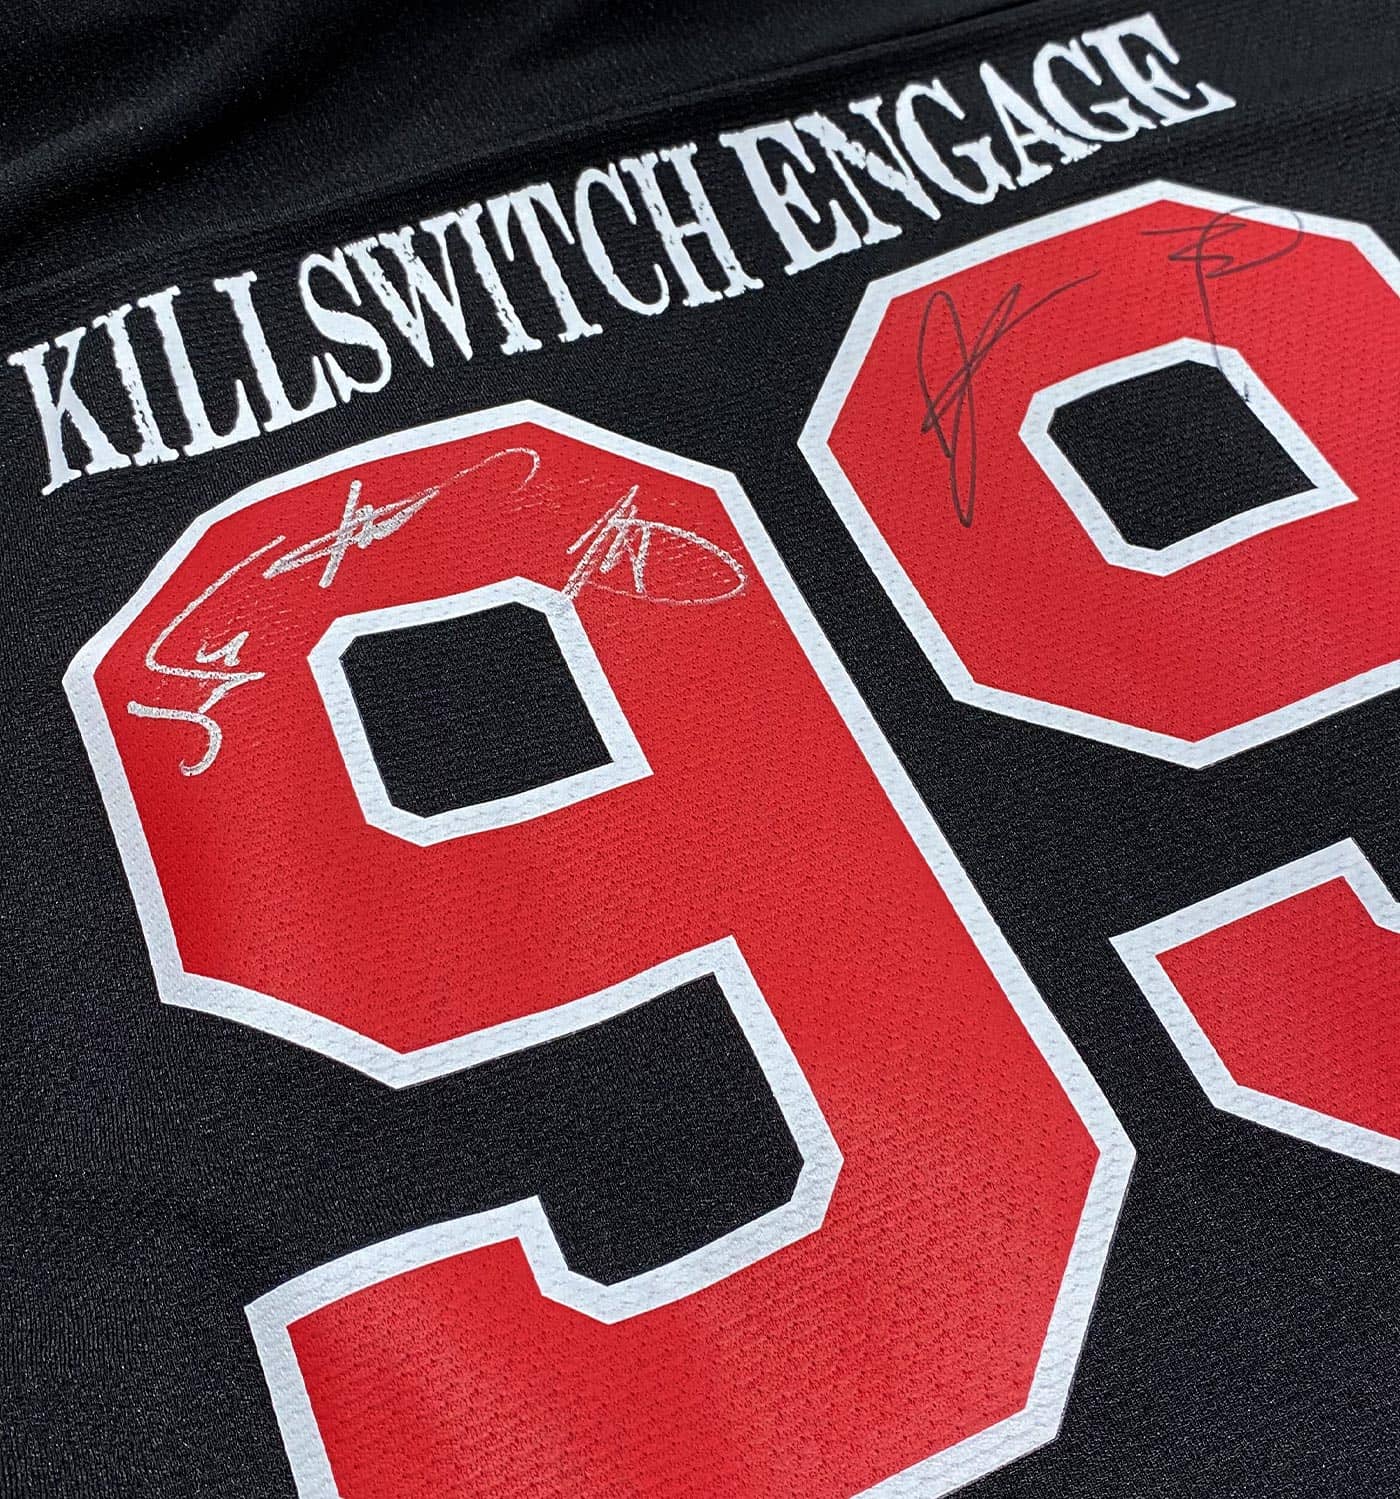 KILLSWITCH ENGAGE 'SKATE BY DESIGN' limited edition autographed hockey jersey in black and red back view